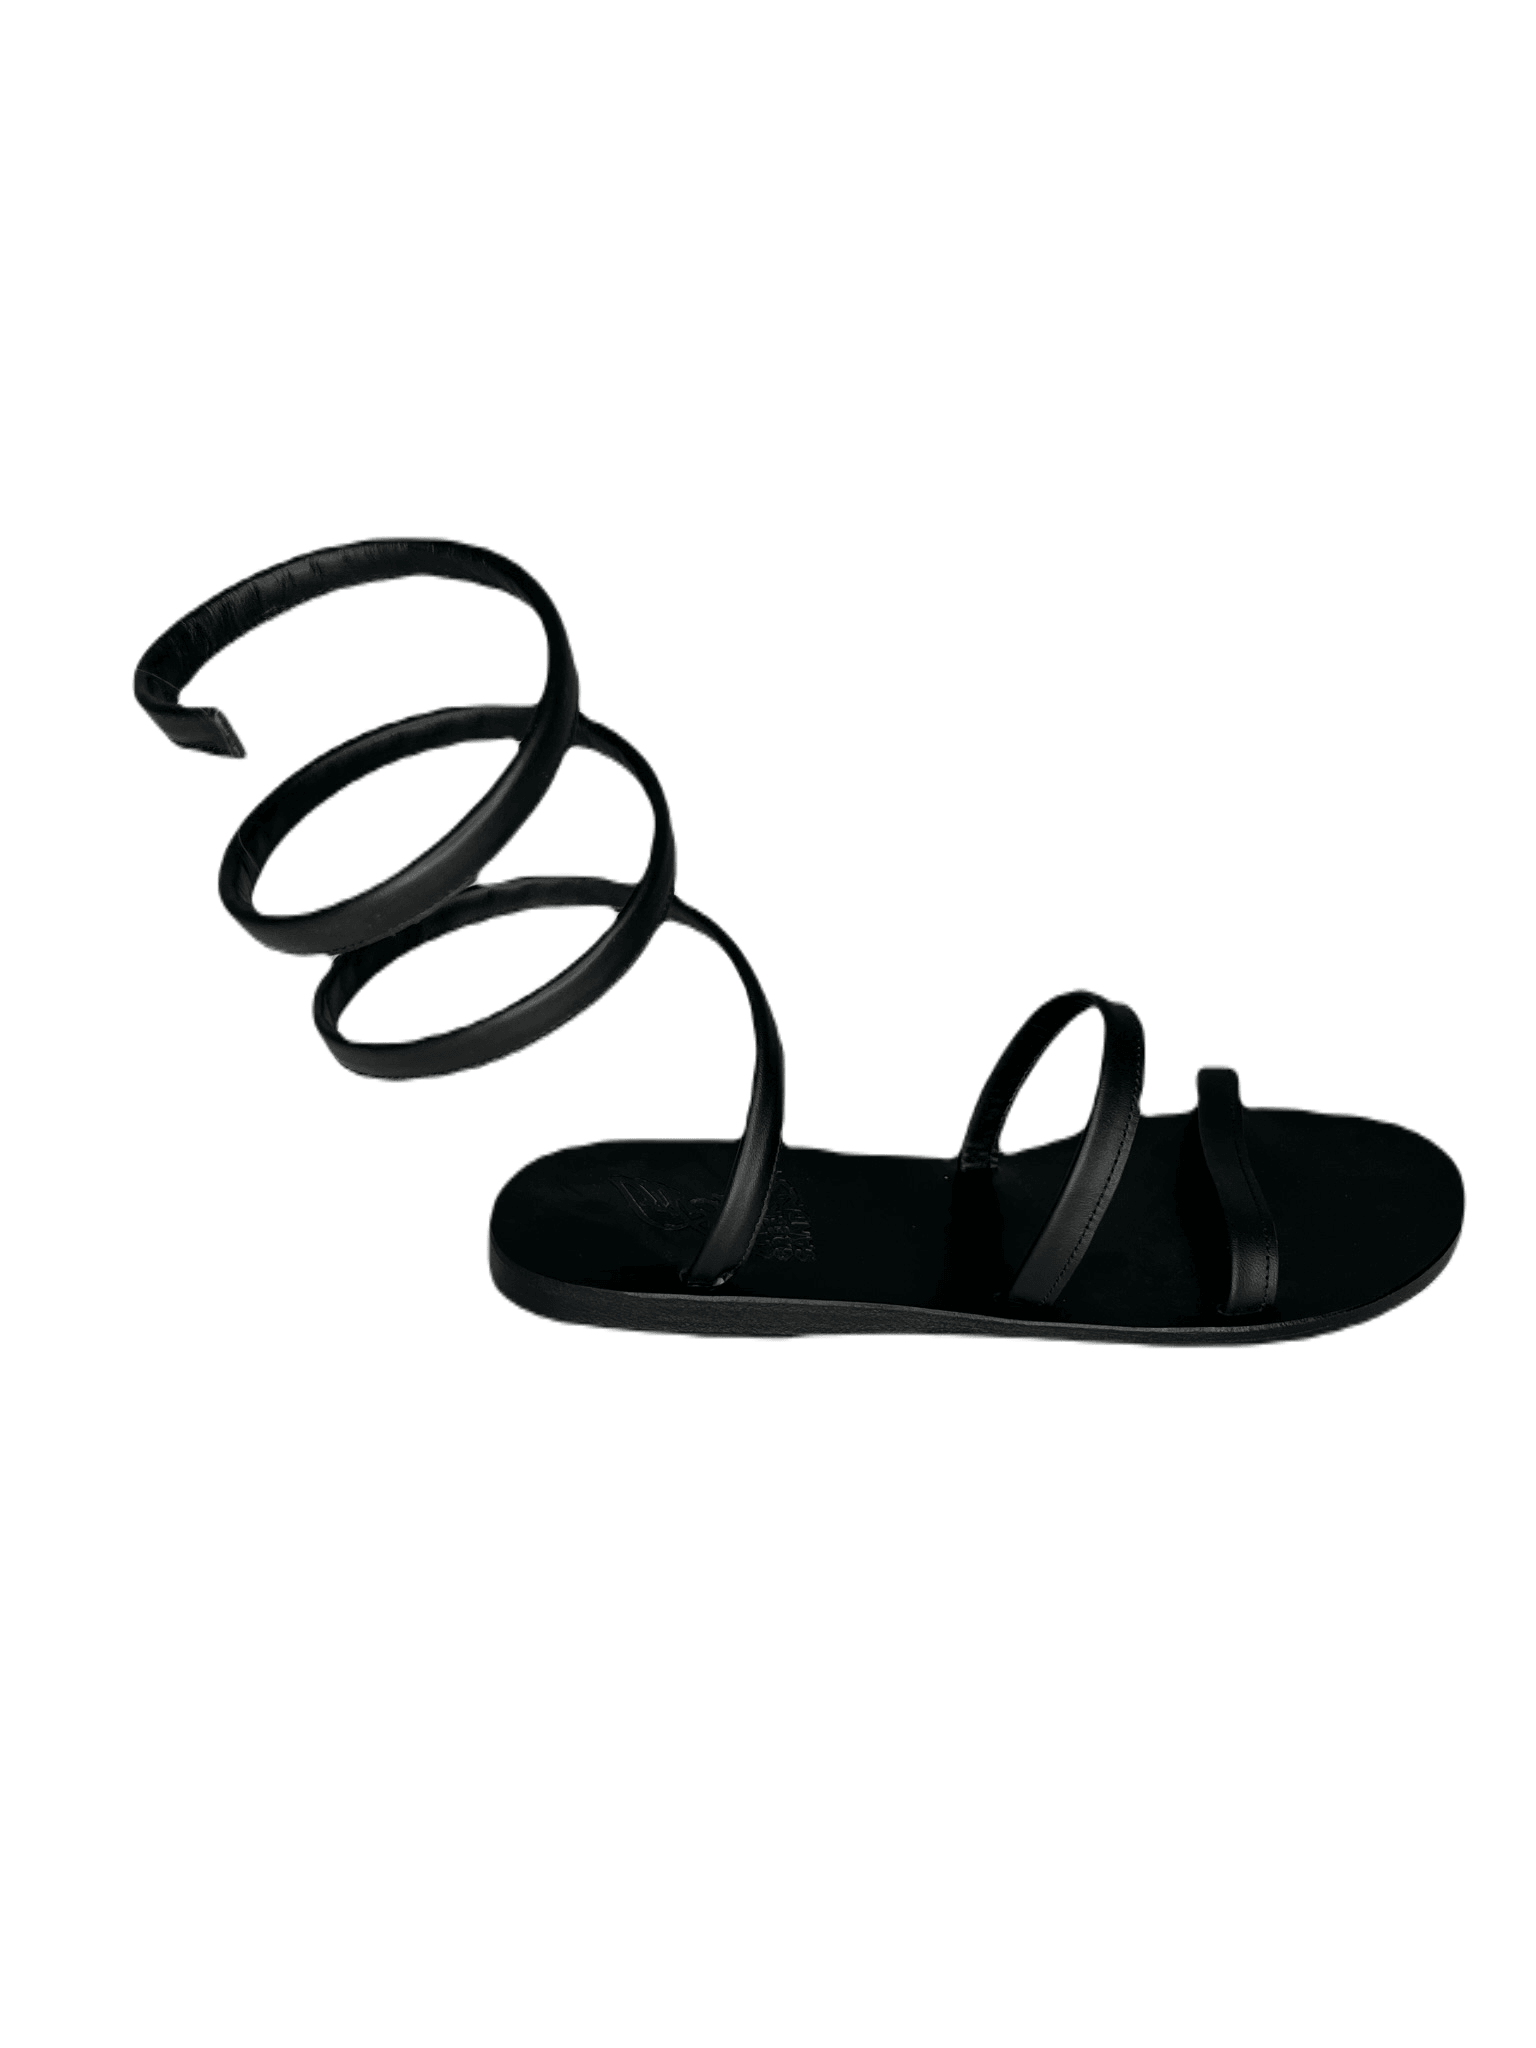 Handmade Ofis Leather Spiral Sandals - Endless